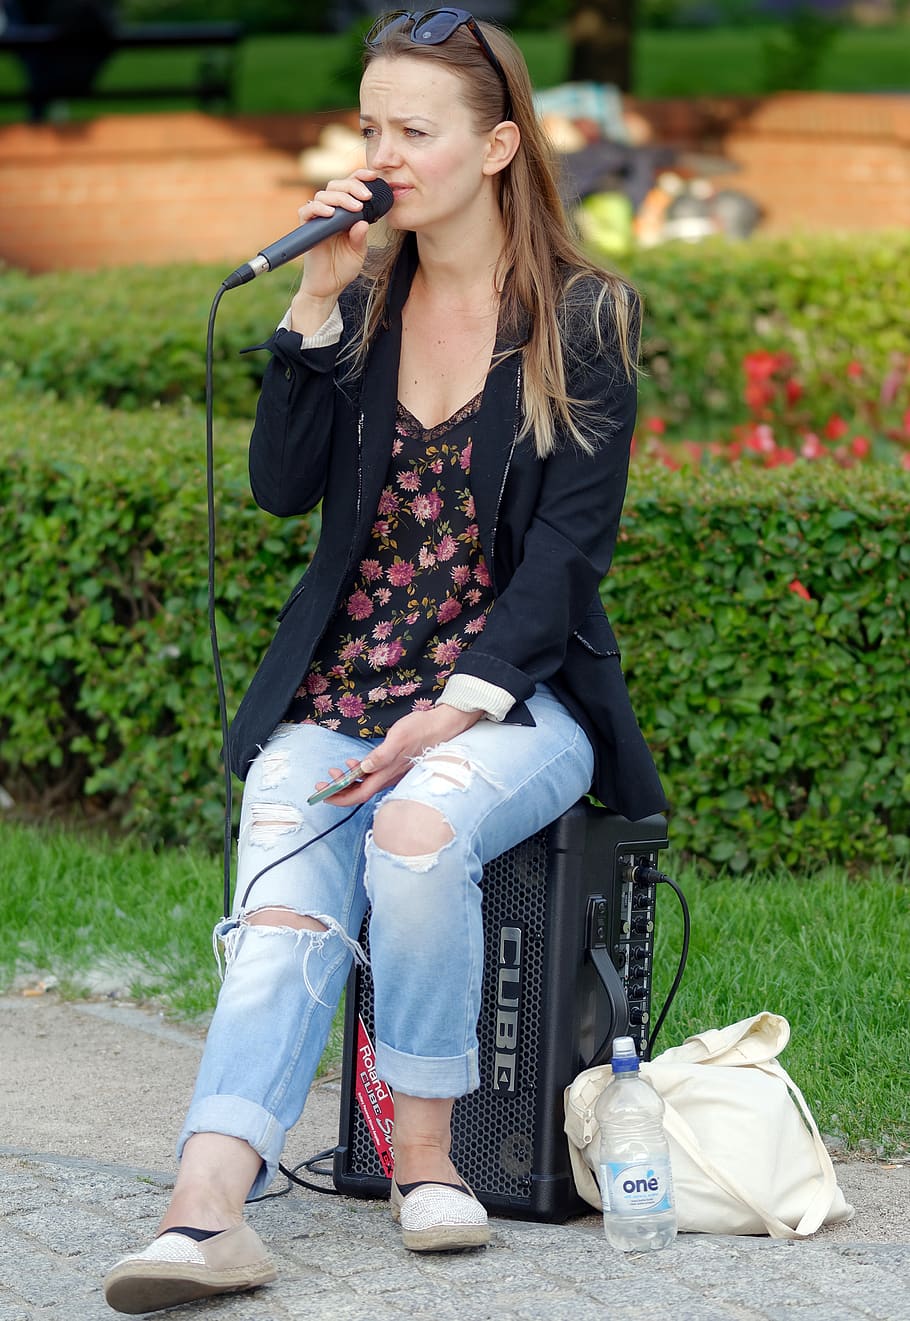 woman, young, music, singing, microphone, speaker, the speaker, hedge, grass, attraction